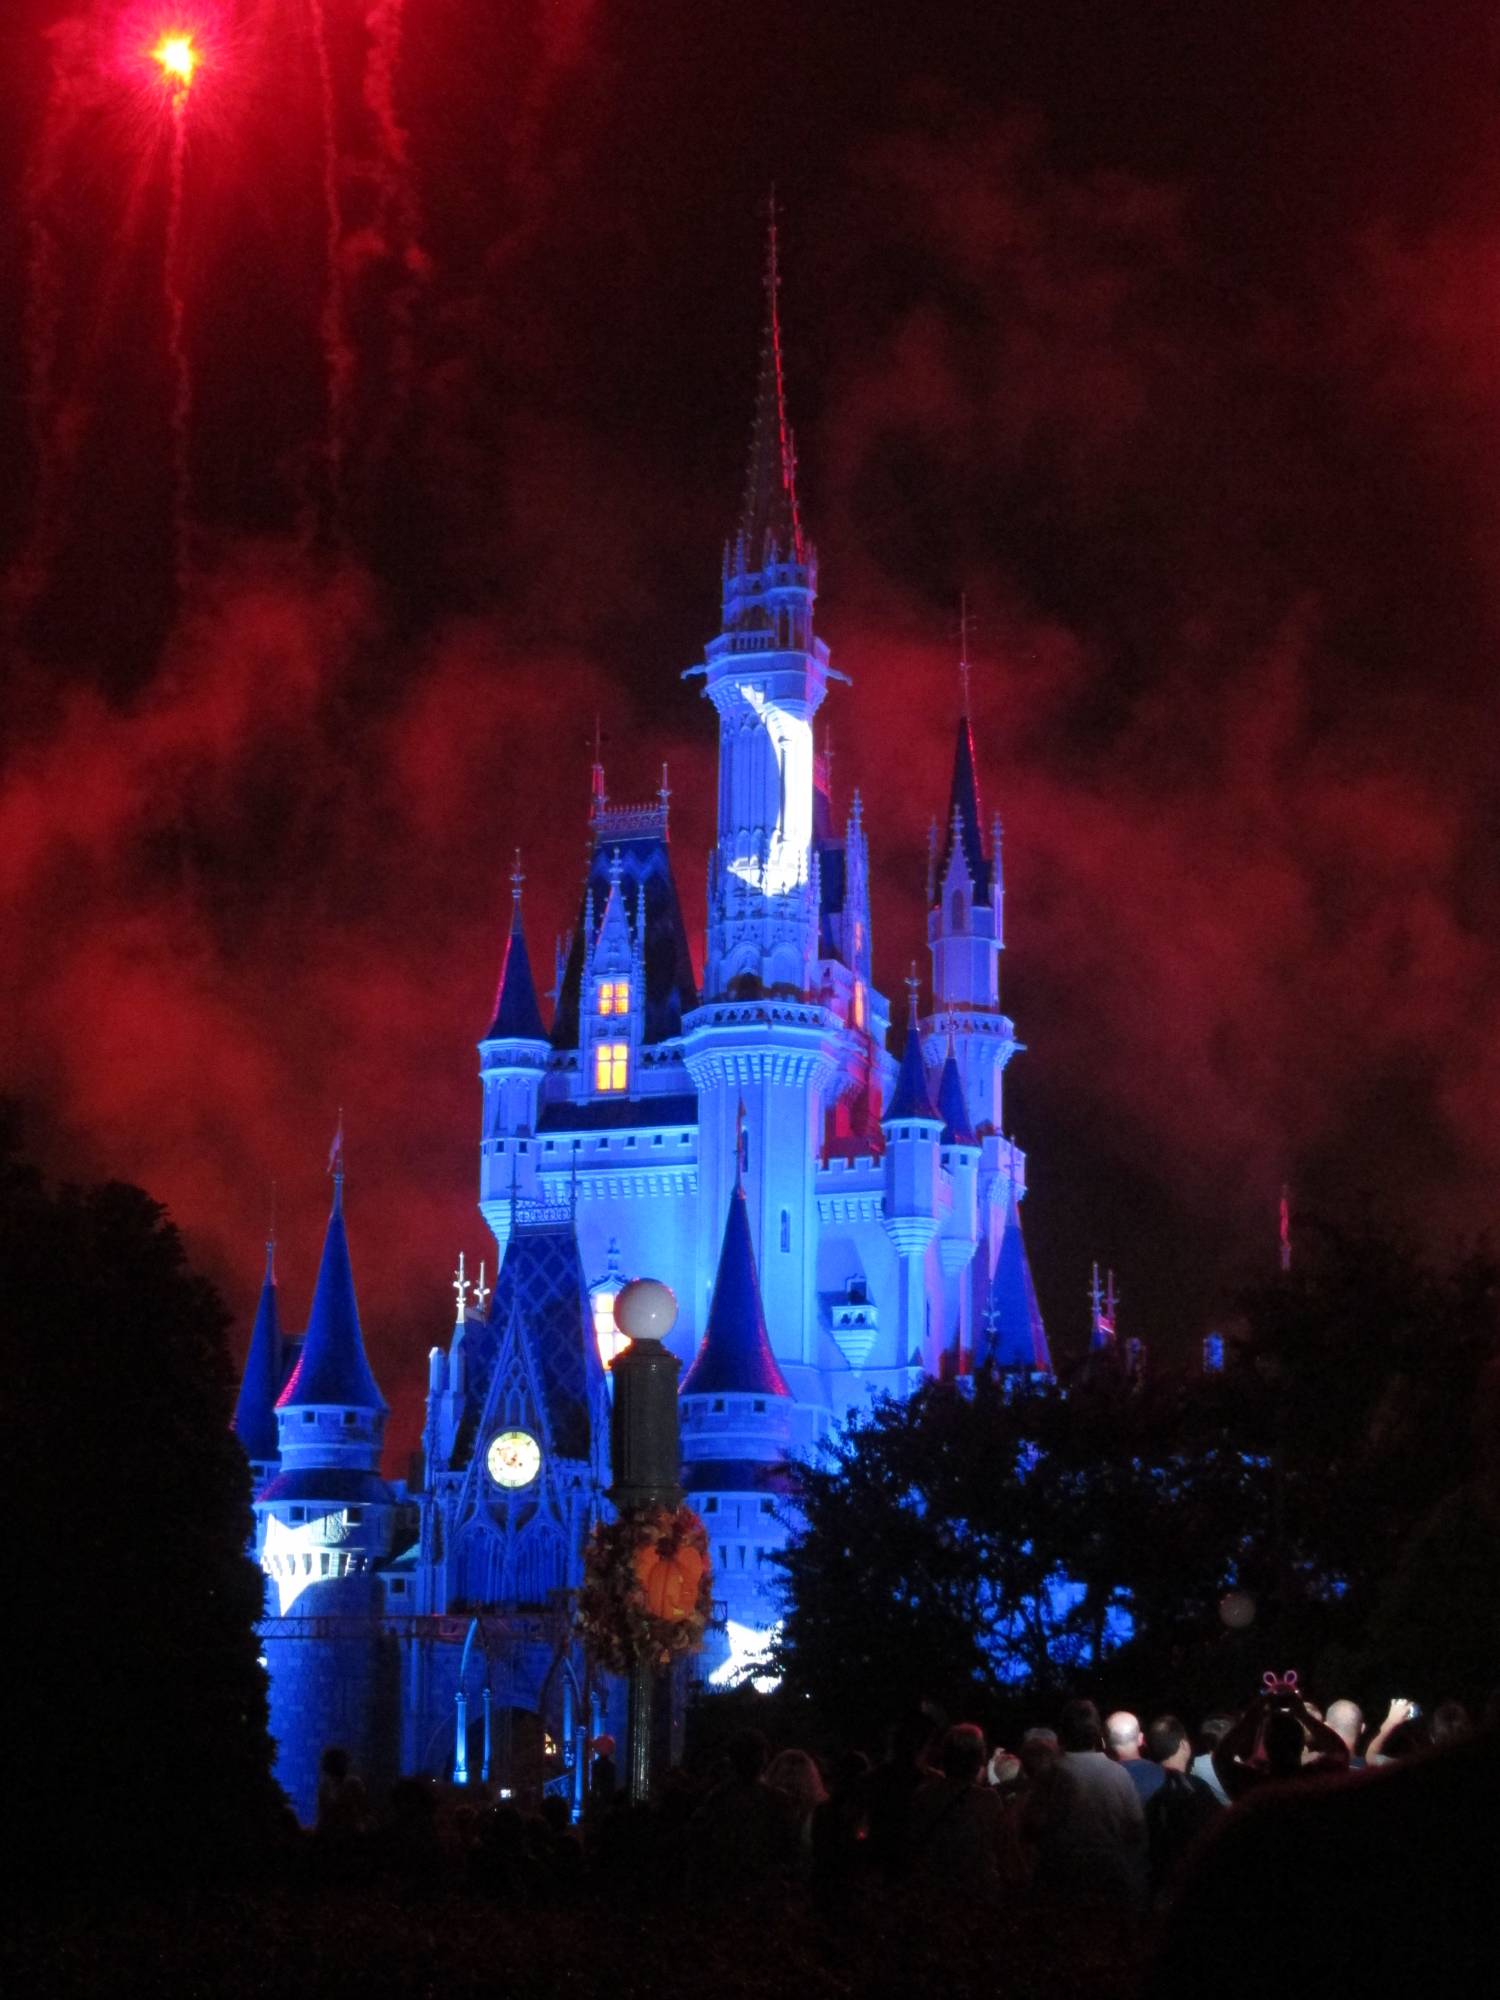 Wishes Fireworks Viewing Suggestions | PassPorter.com